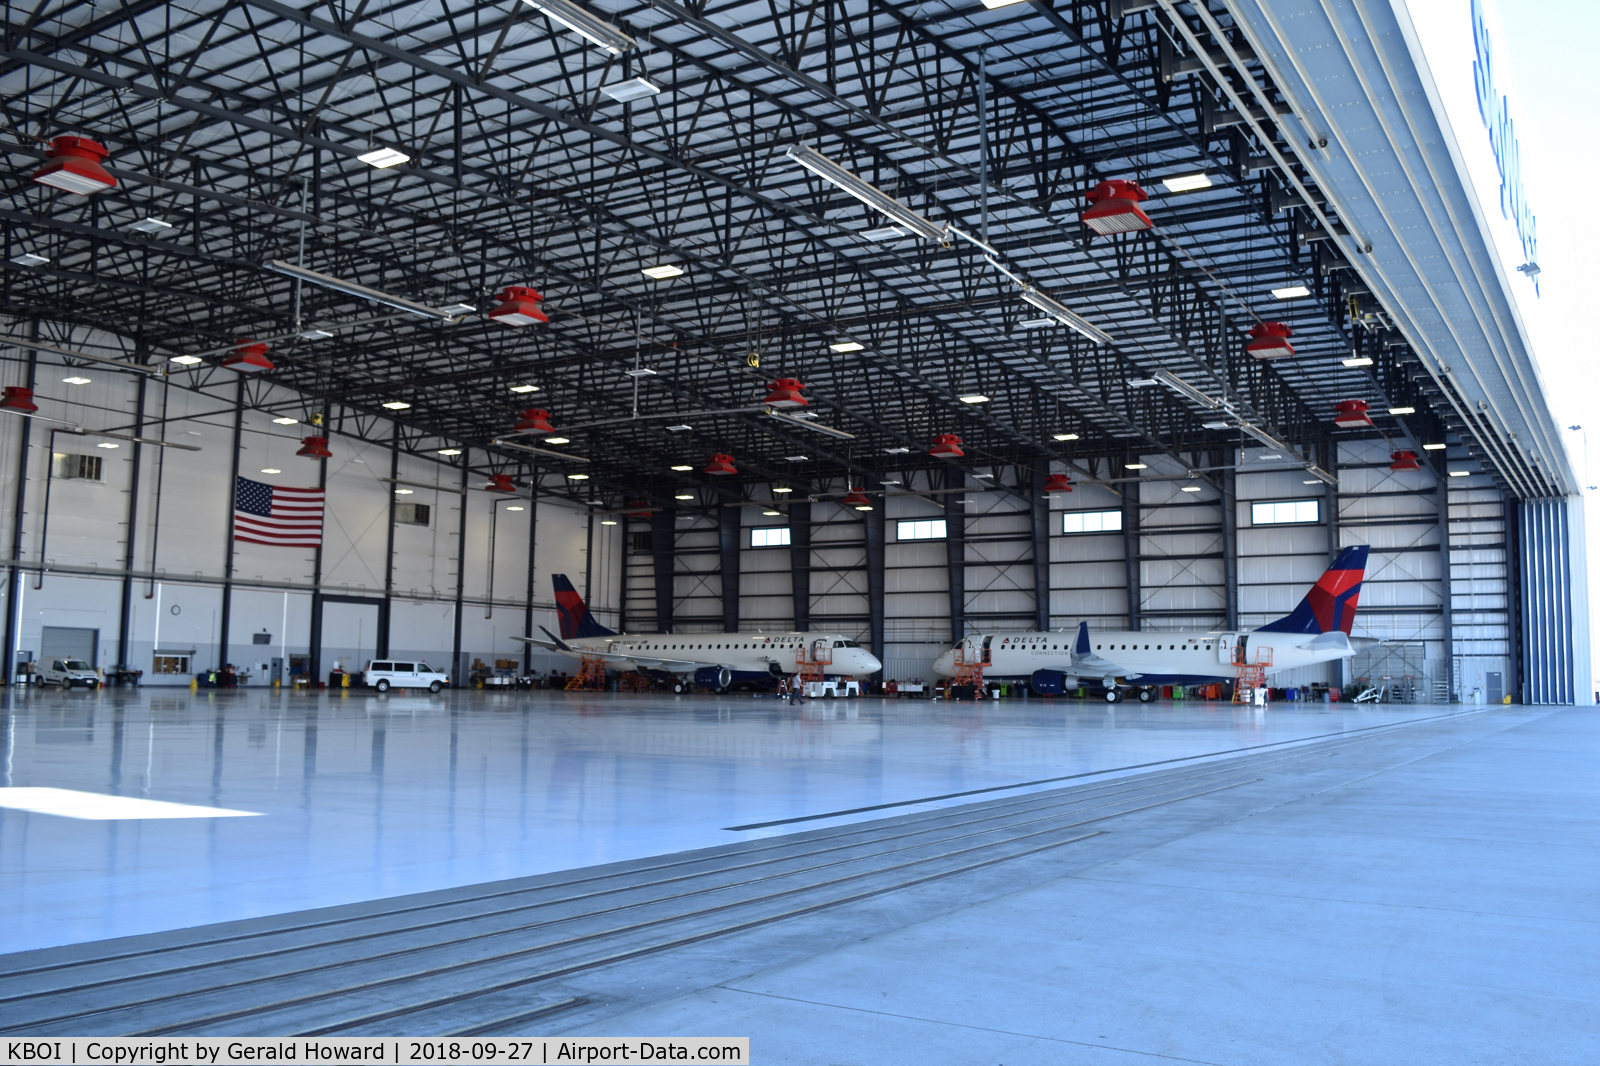 Boise Air Terminal/gowen Fld Airport (BOI) - Two Embraer ERJ 175LRs in the Skywest Maintenance hangar for final checks. Fresh from the factory in South America. Owned by Skywest, but flown under Delta colors.